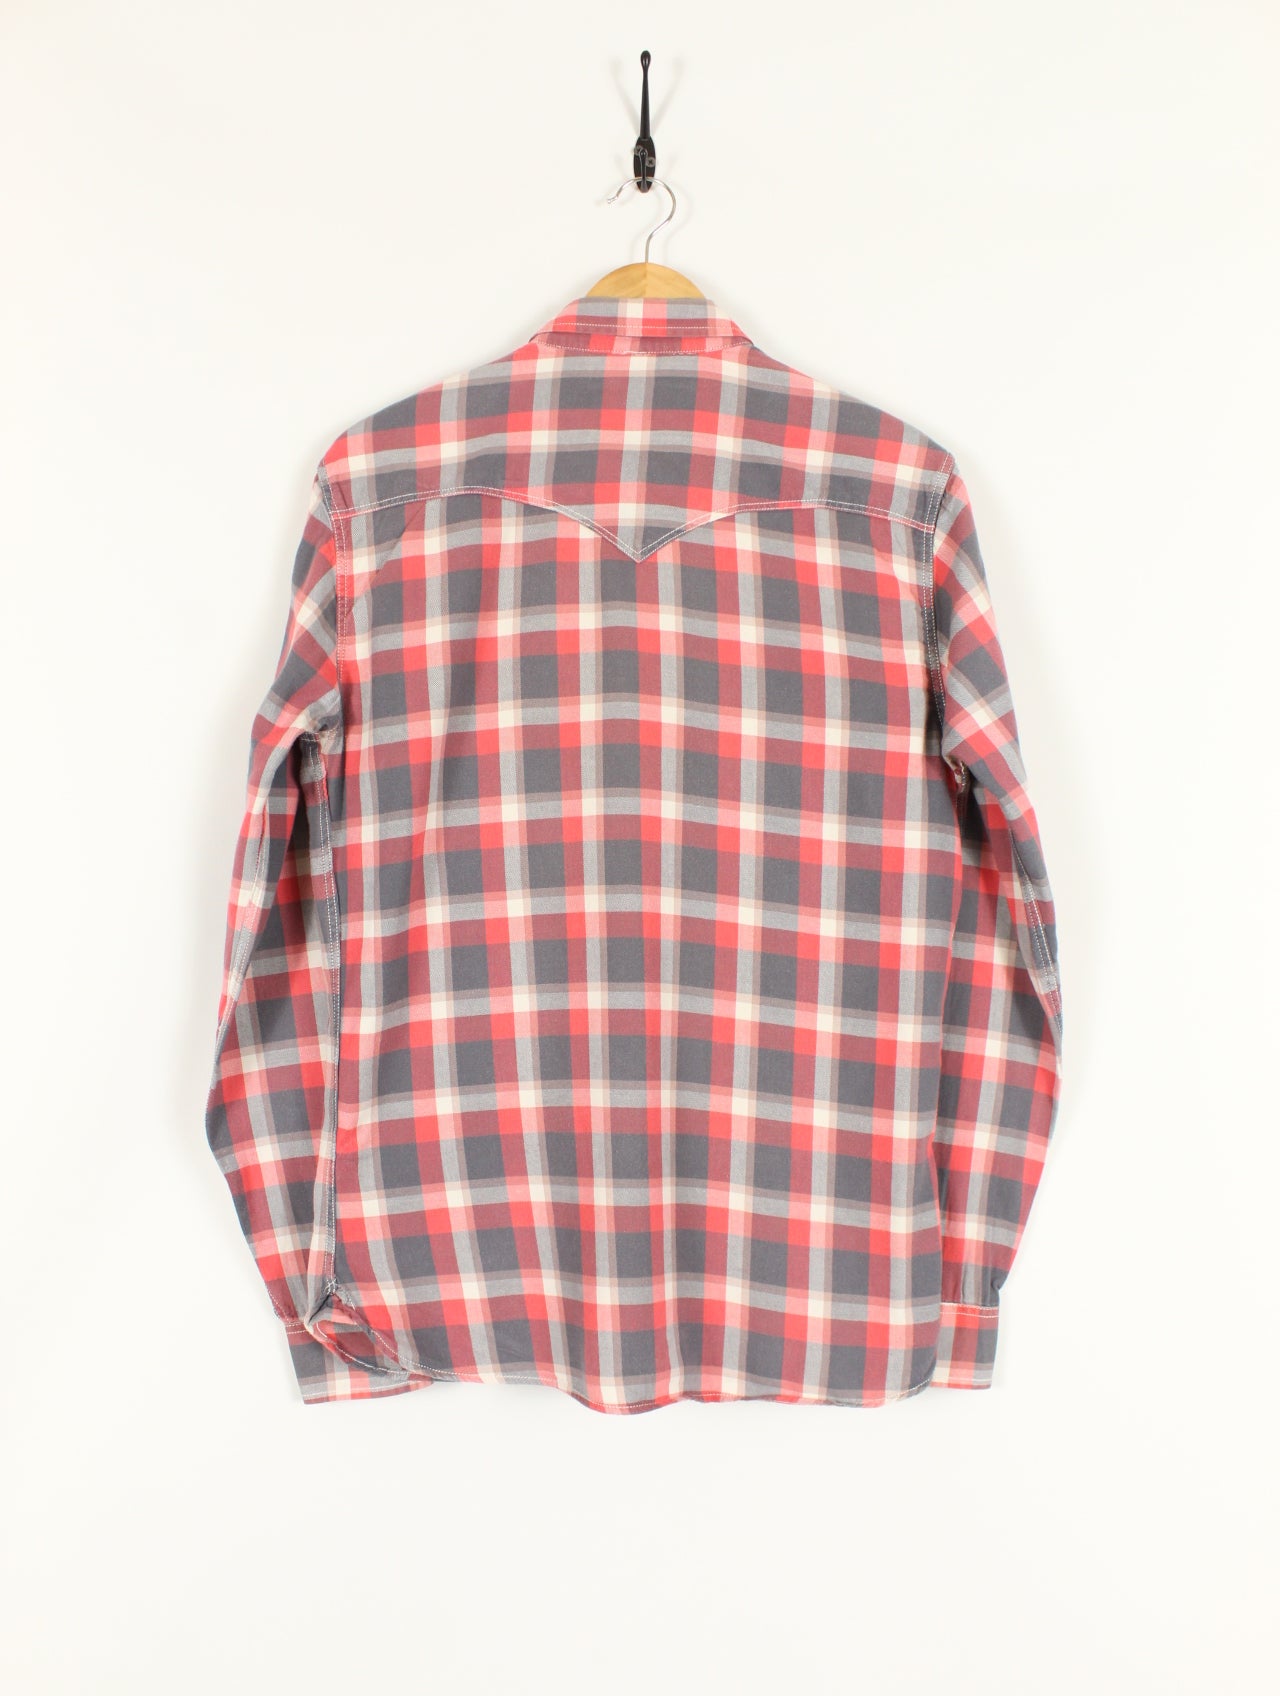 Checked Levis Flannel Shirt (M)